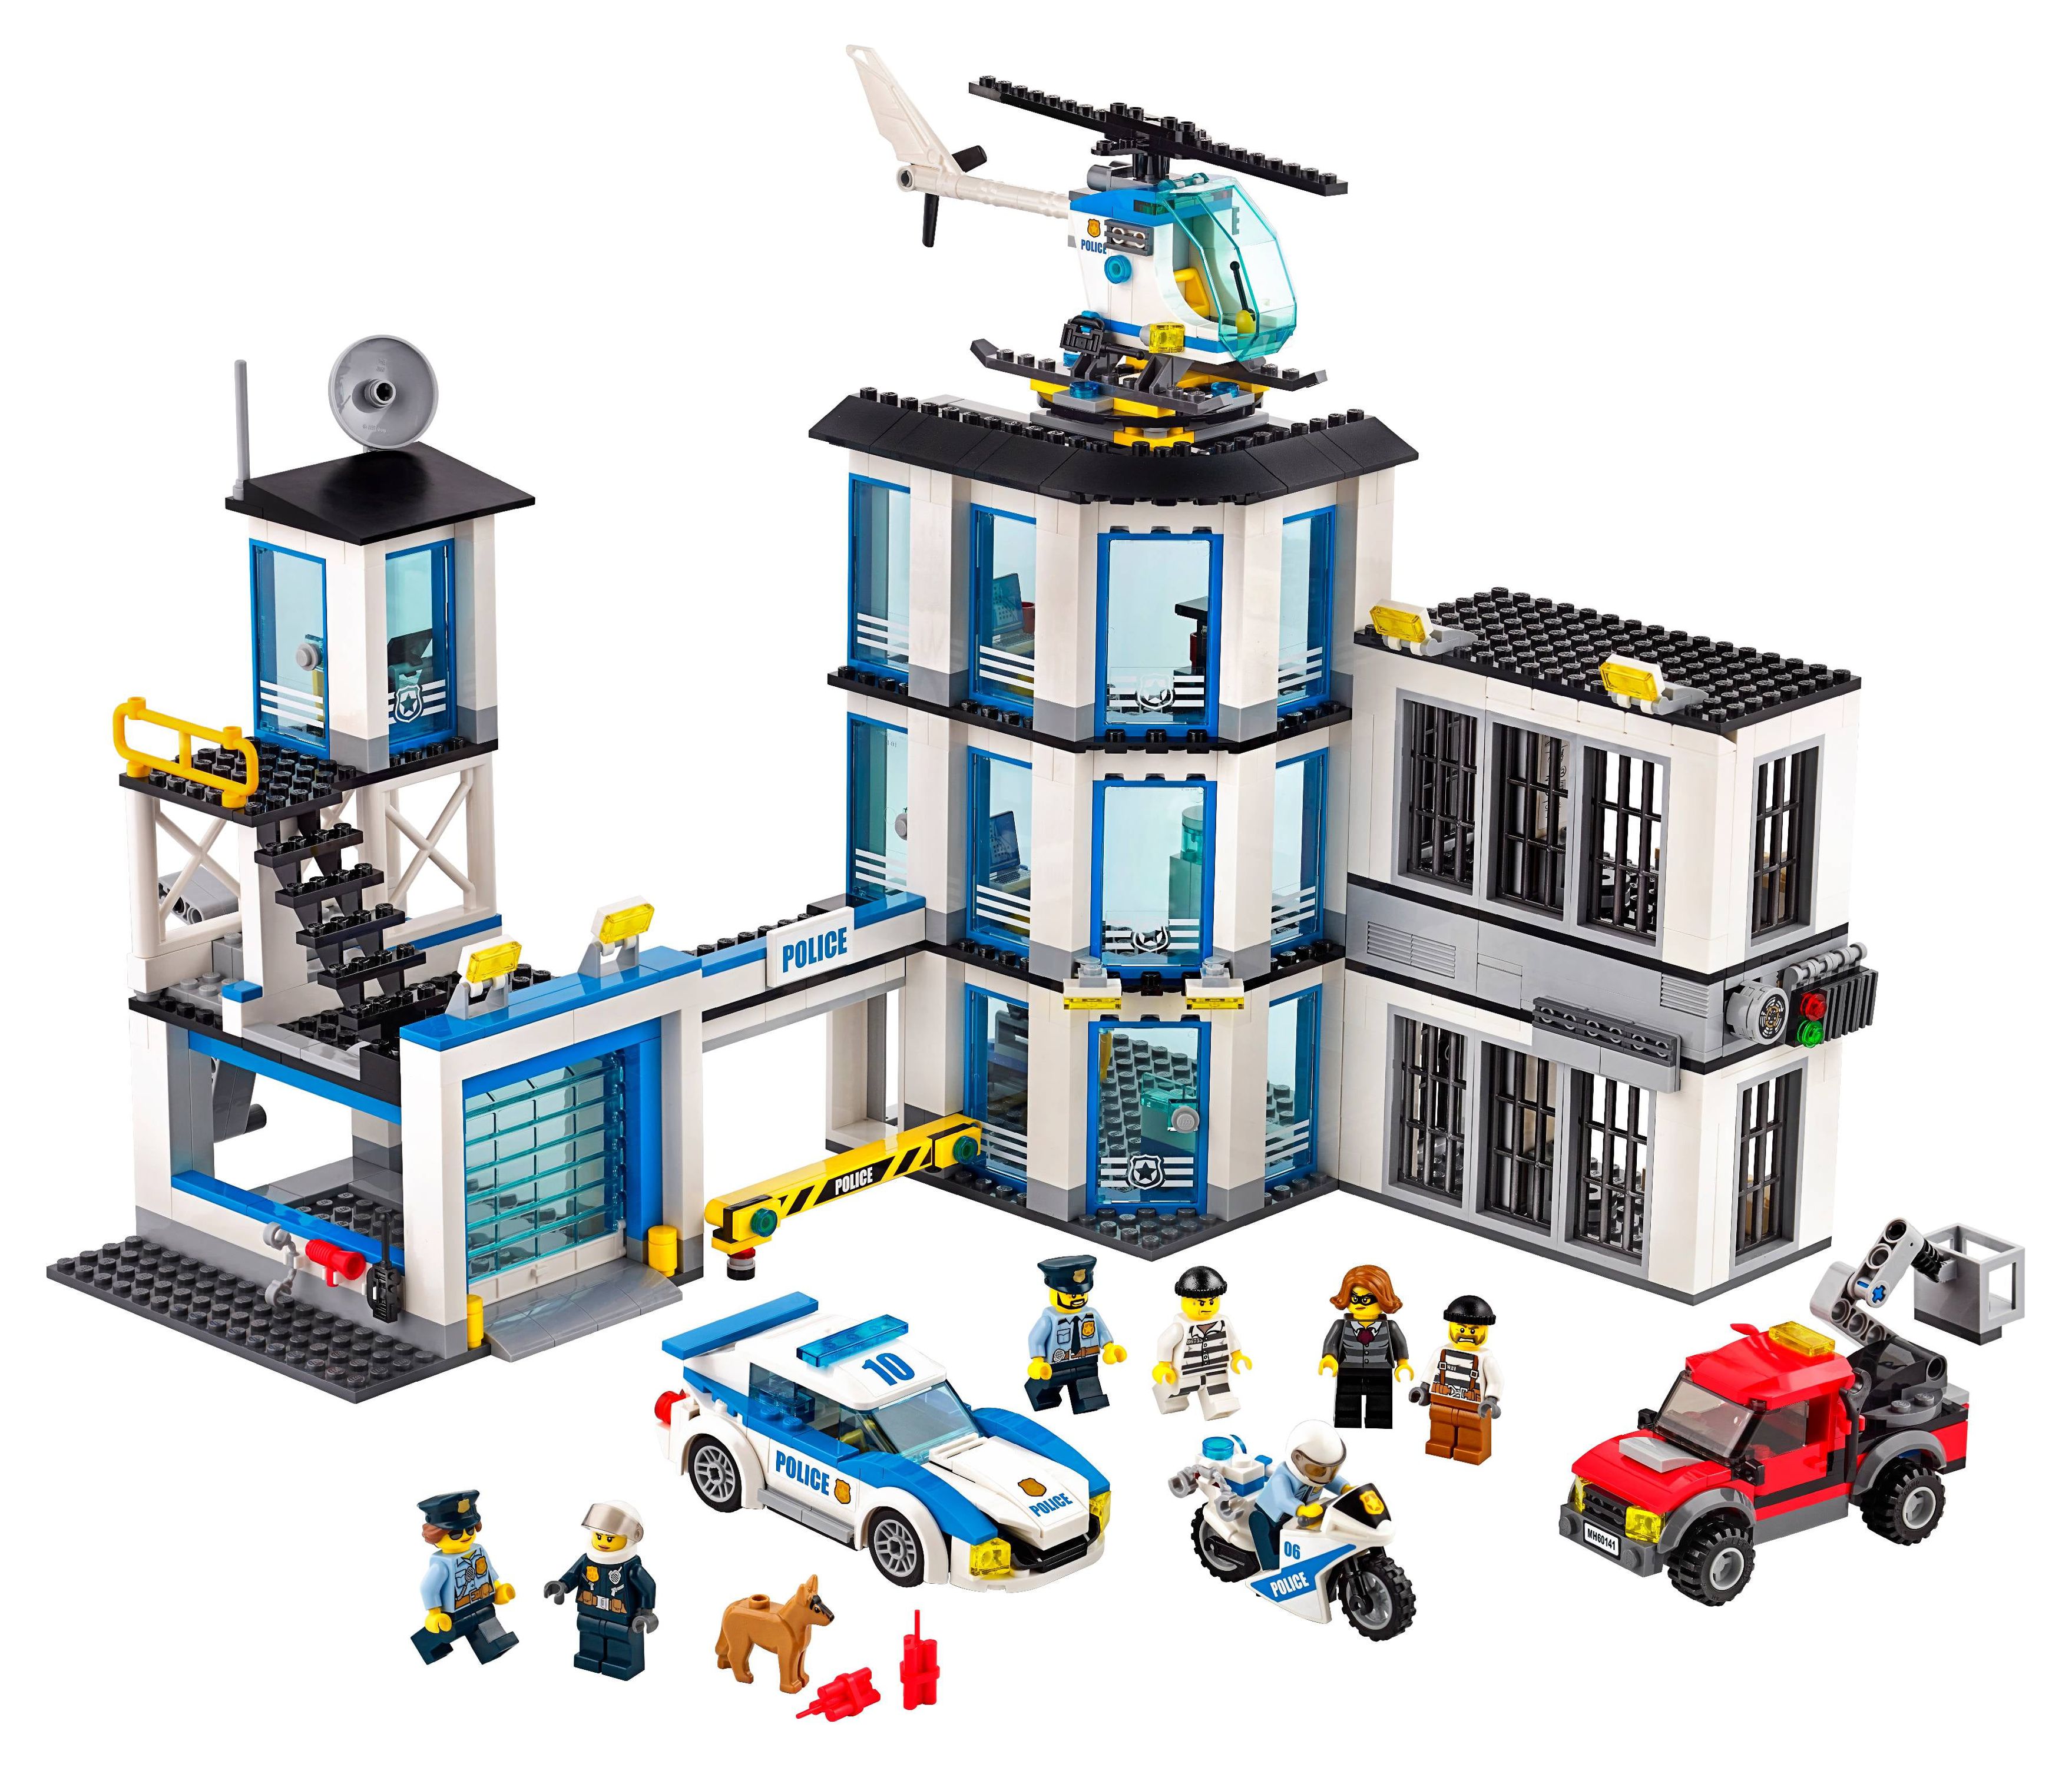 LEGO City Police Station 60141 Building Set (894 Pieces) - image 2 of 7